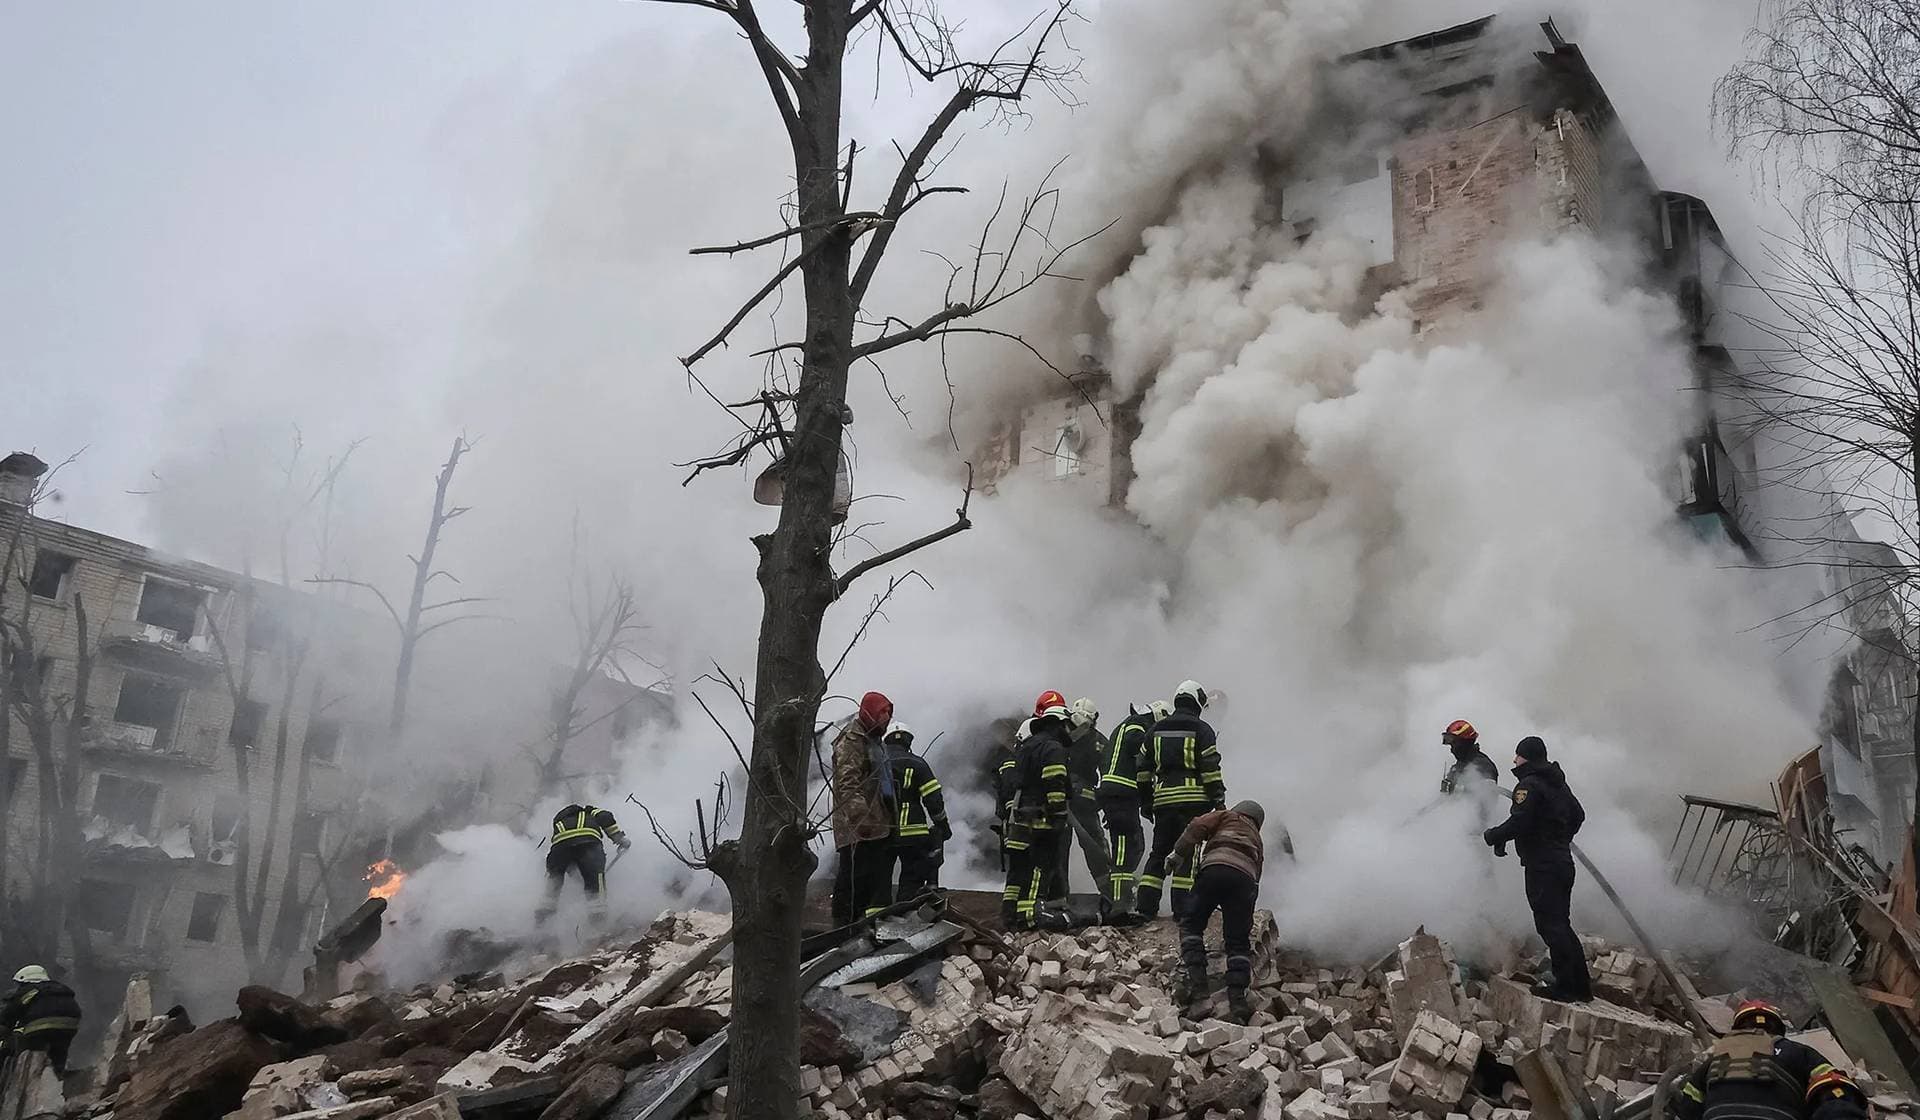 Rescuers work at a site of a residential building heavily damaged during a Russian missile attack in Kharkiv